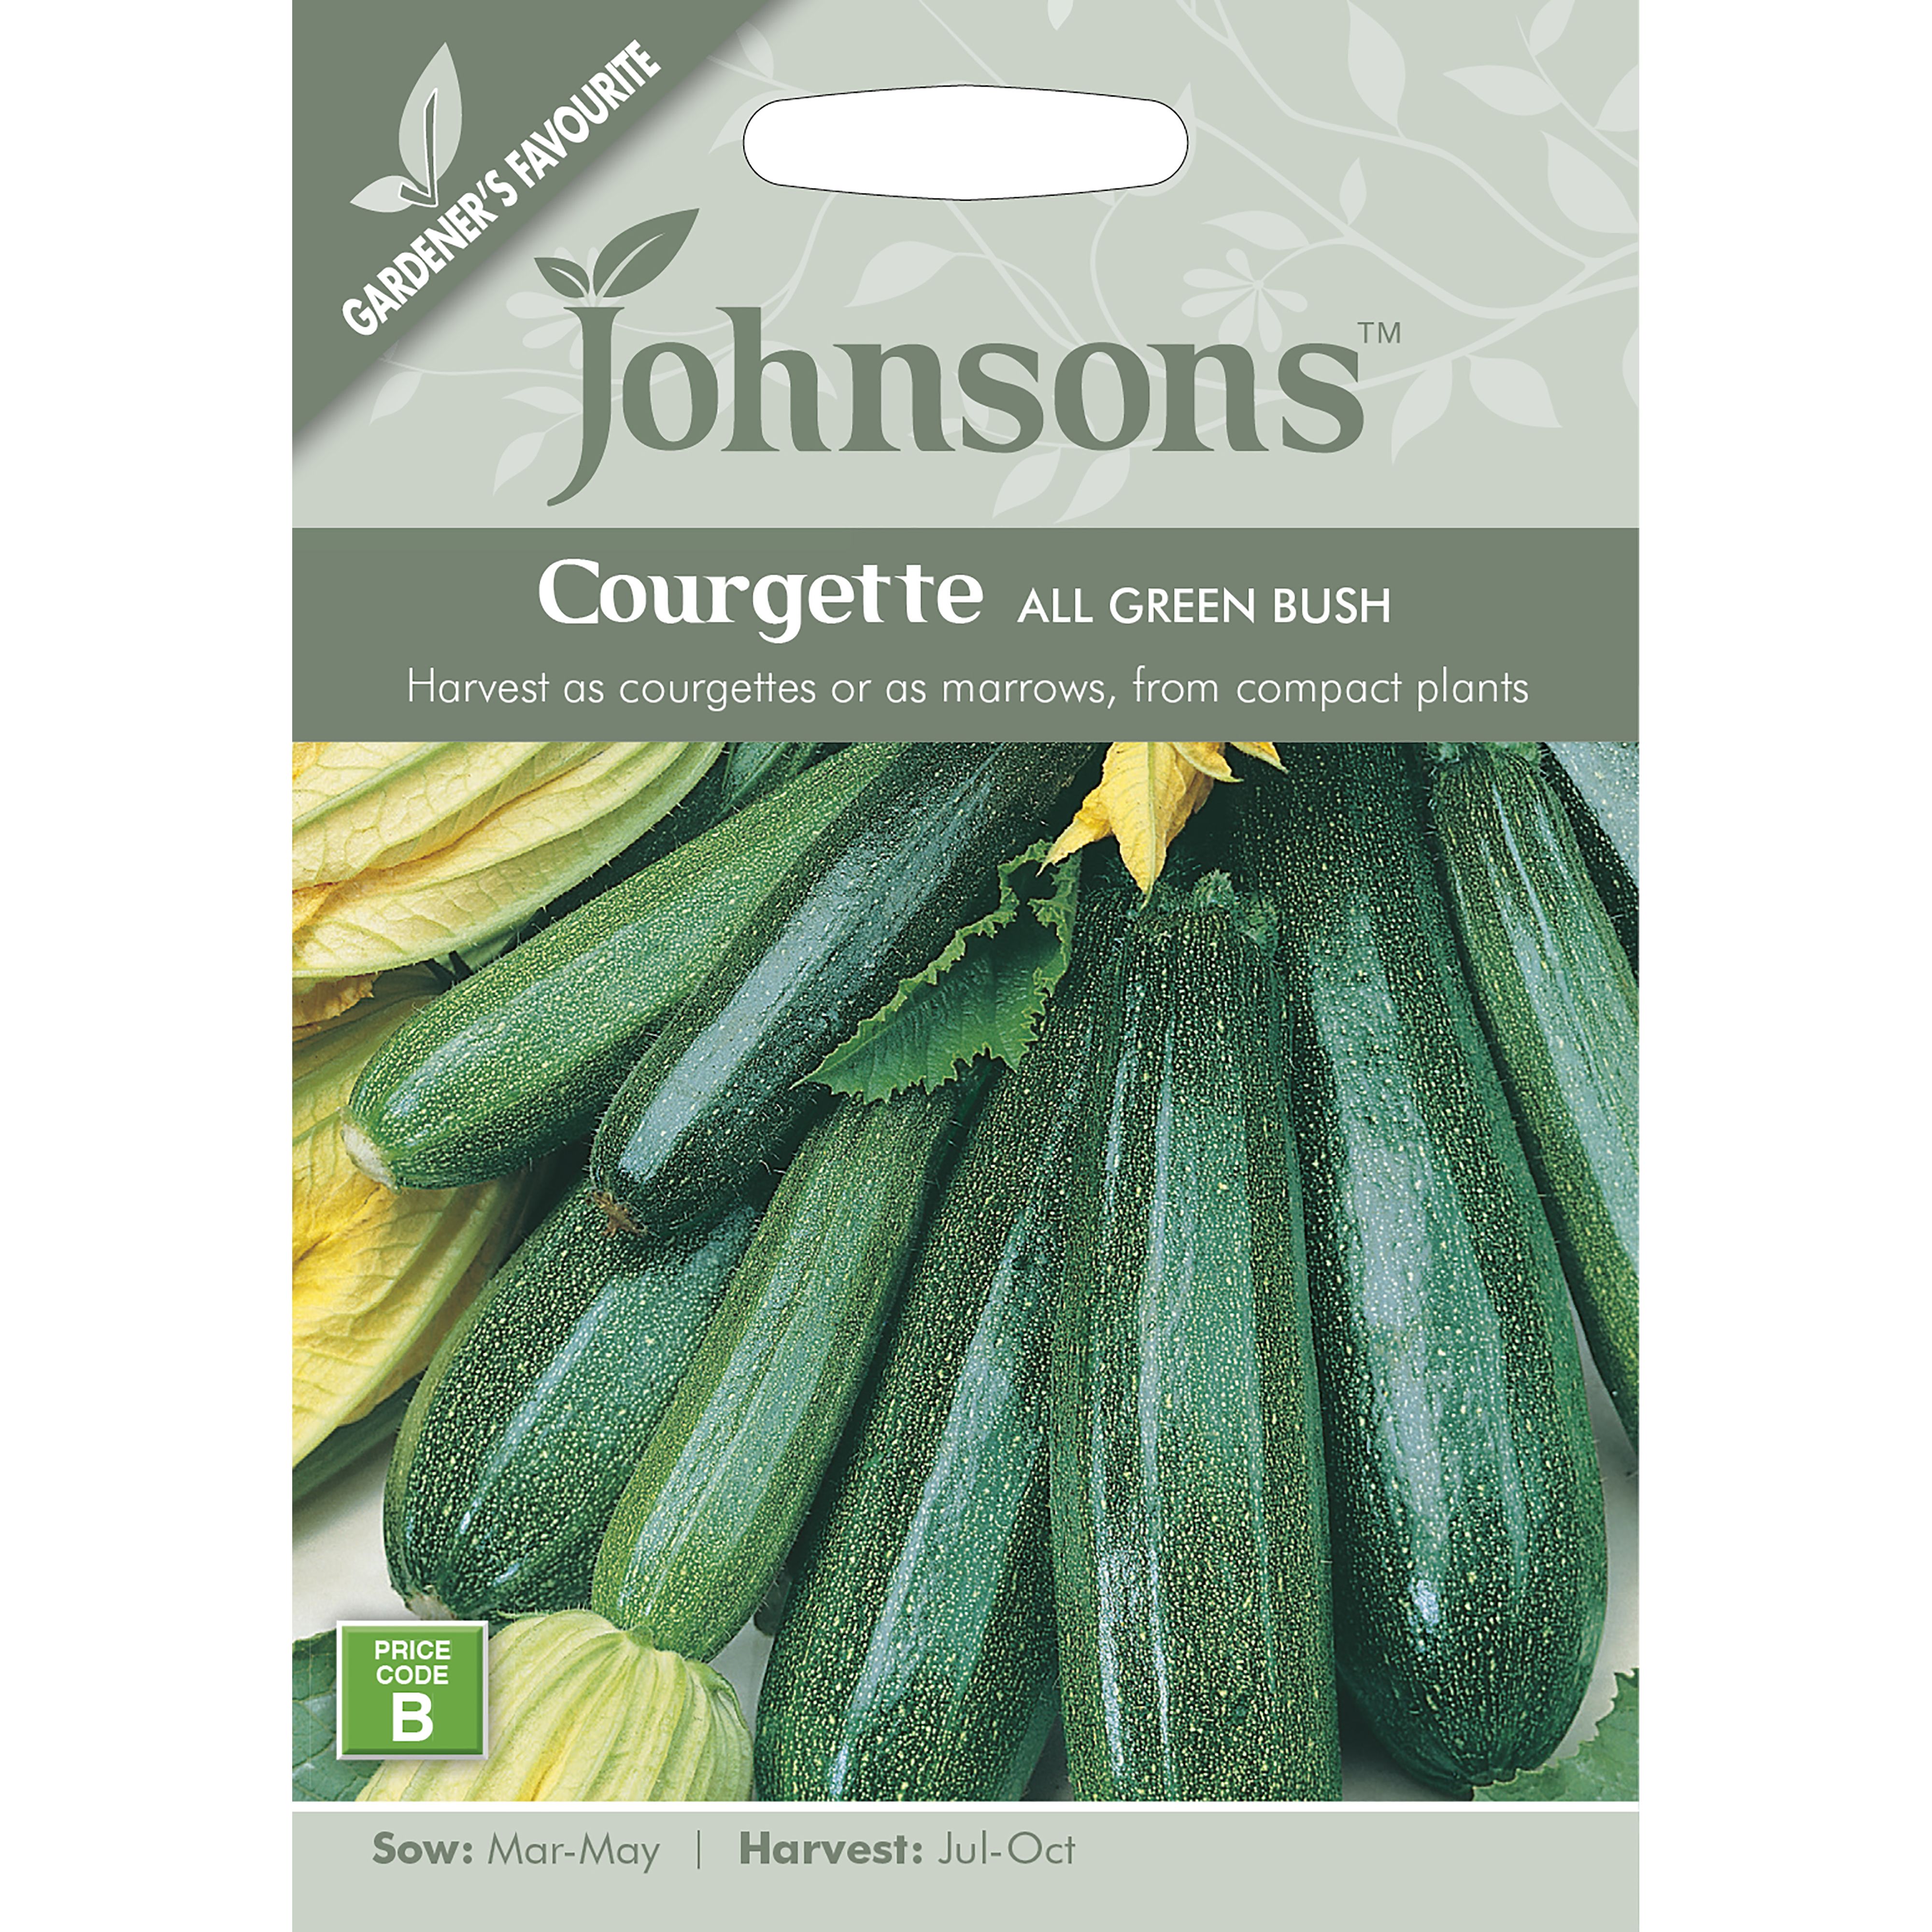 All Green Bush Courgette Seed